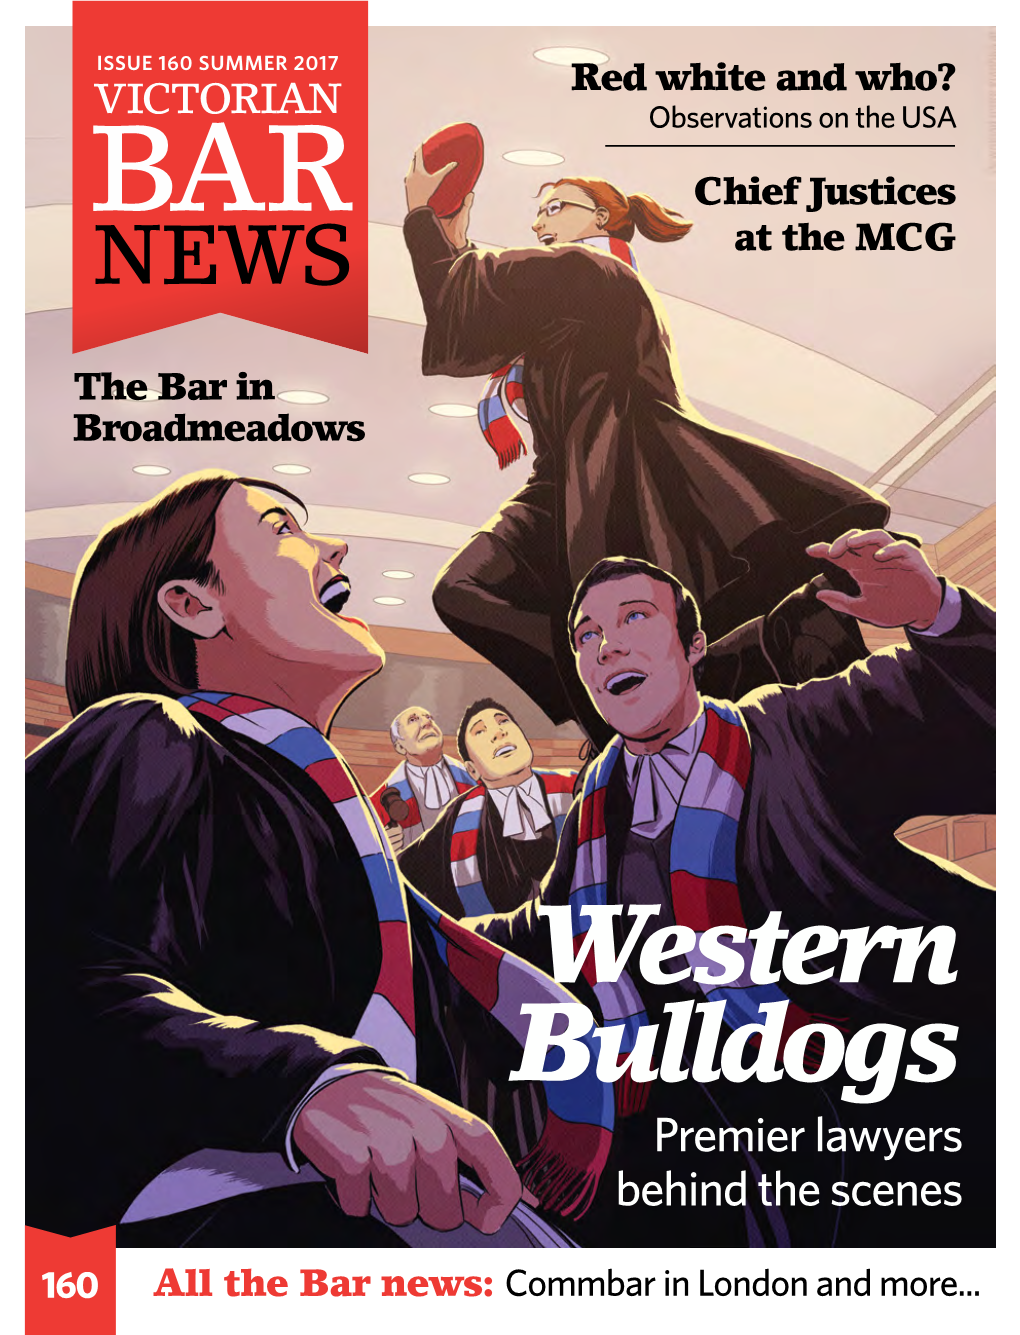 VICTORIAN BAR NEWS ISSUE 160 SUMMER 2017 Red White and Who? VICTORIAN Observations on the USA BAR Chief Justices NEWS at the MCG